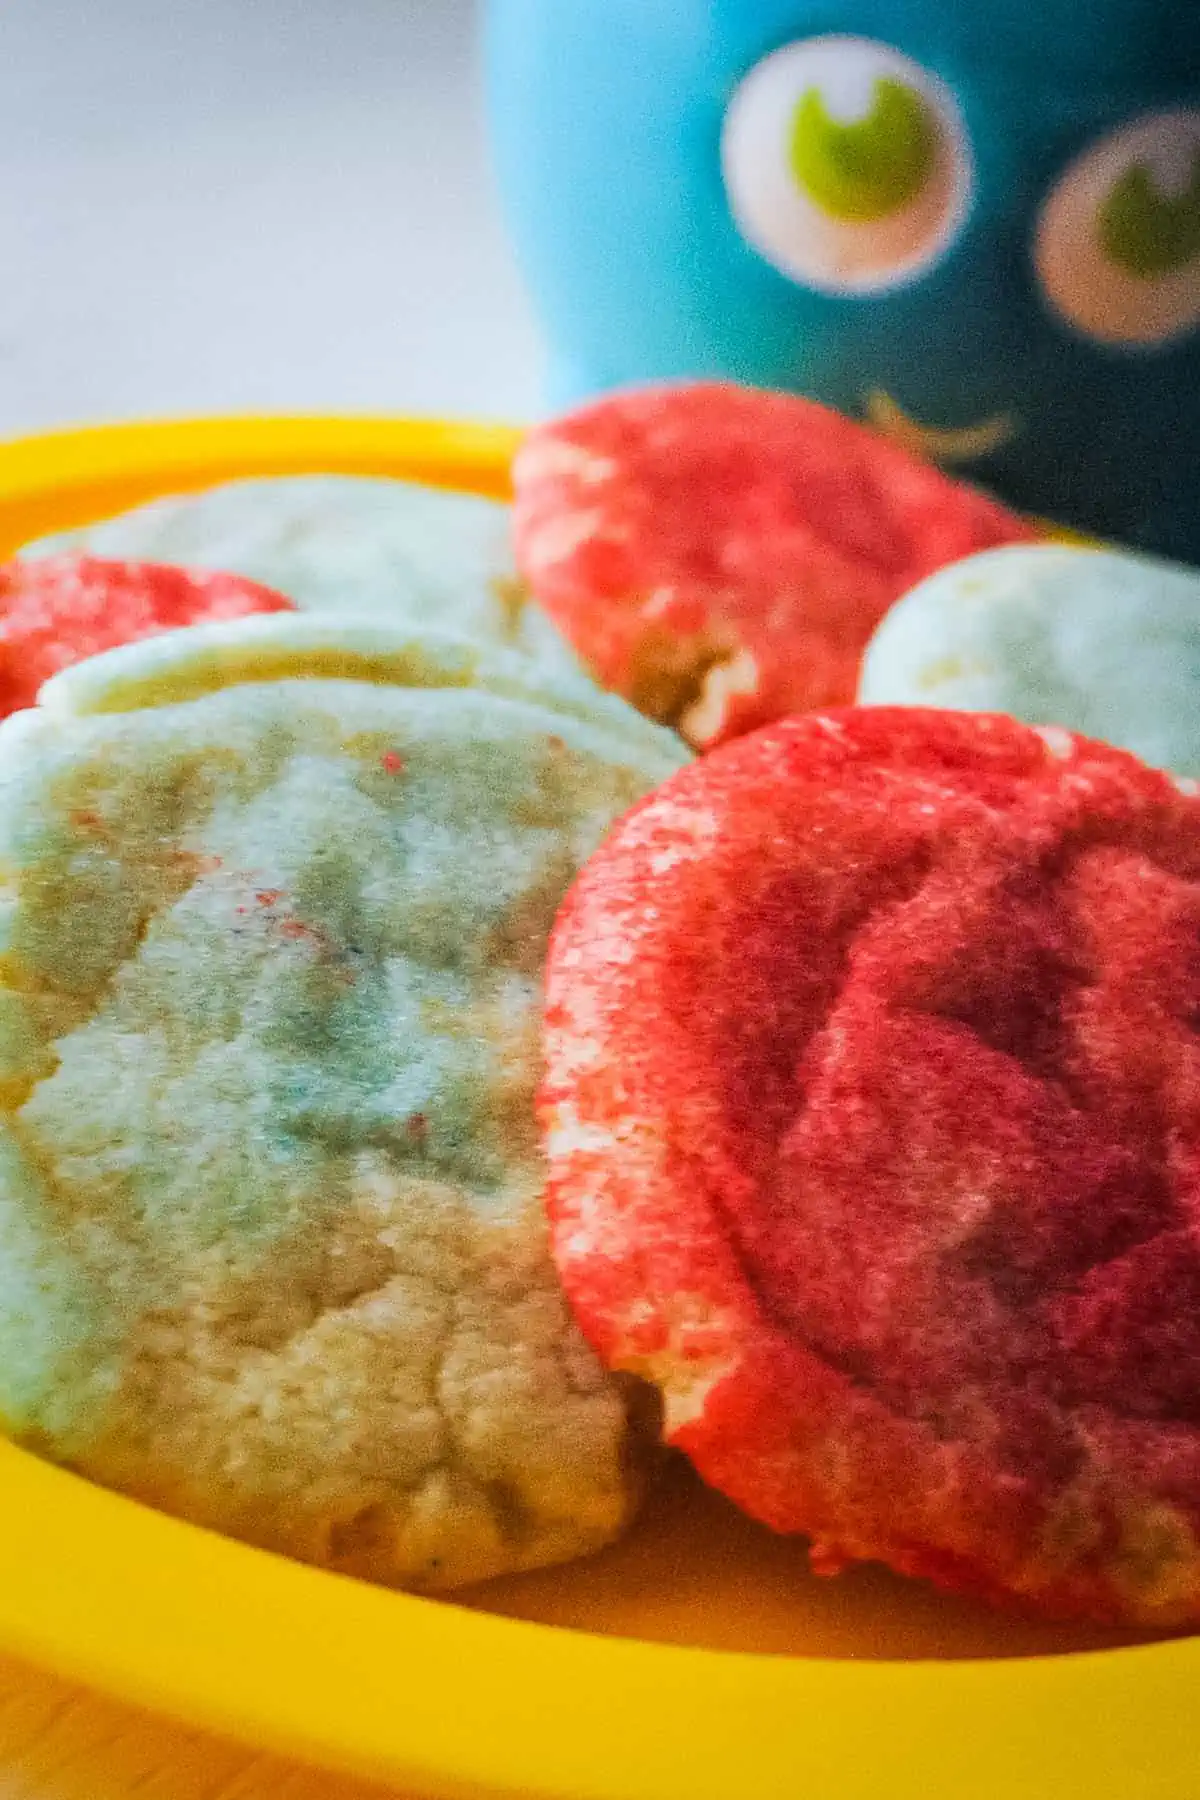 cookies made with Jello on yellow plate with blue whale mug in background